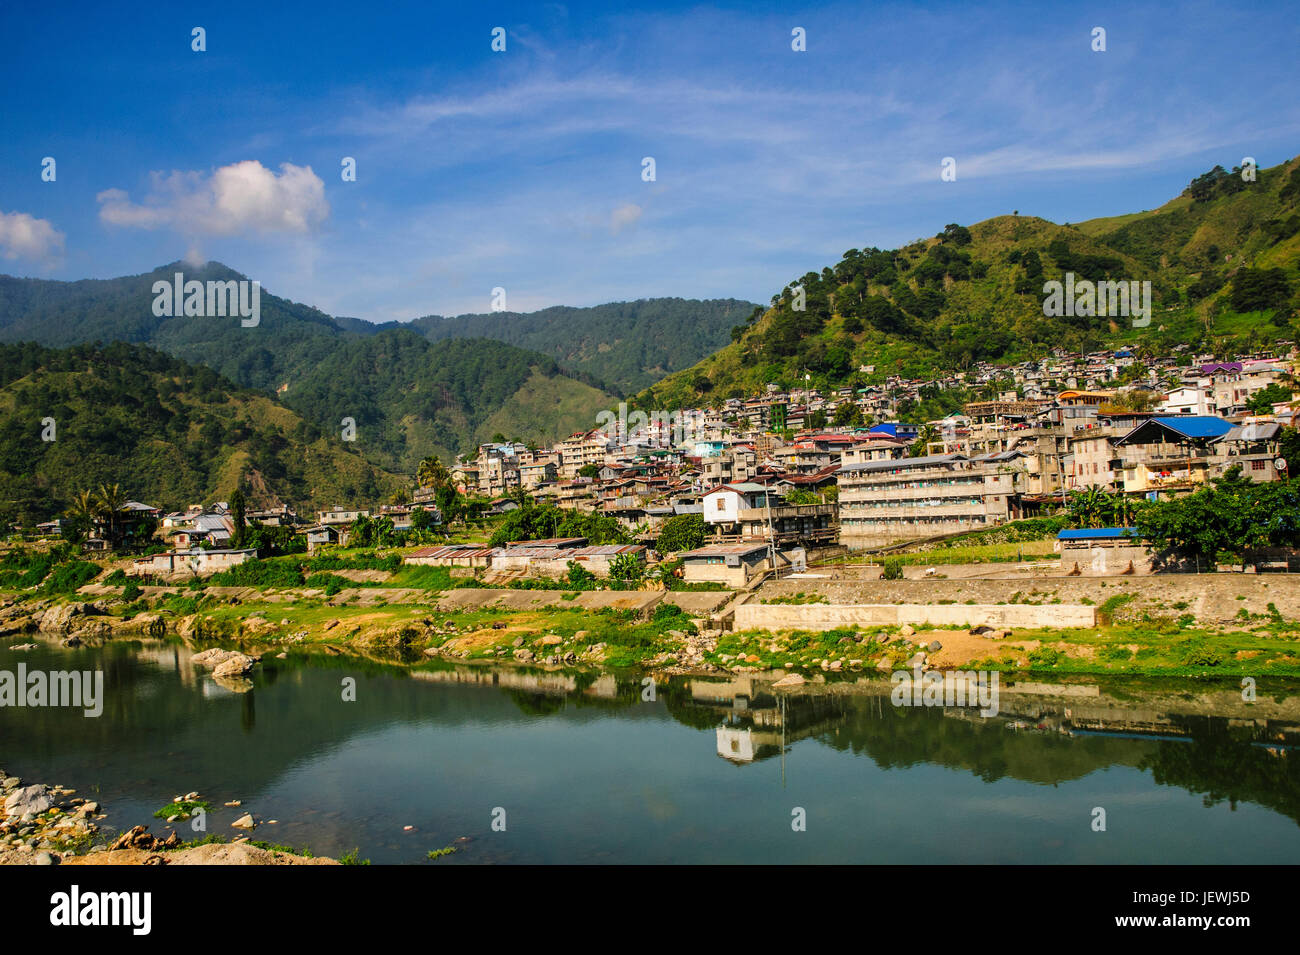 Overlook of the town of Bontoc, Luzon, Philippines Stock Photo